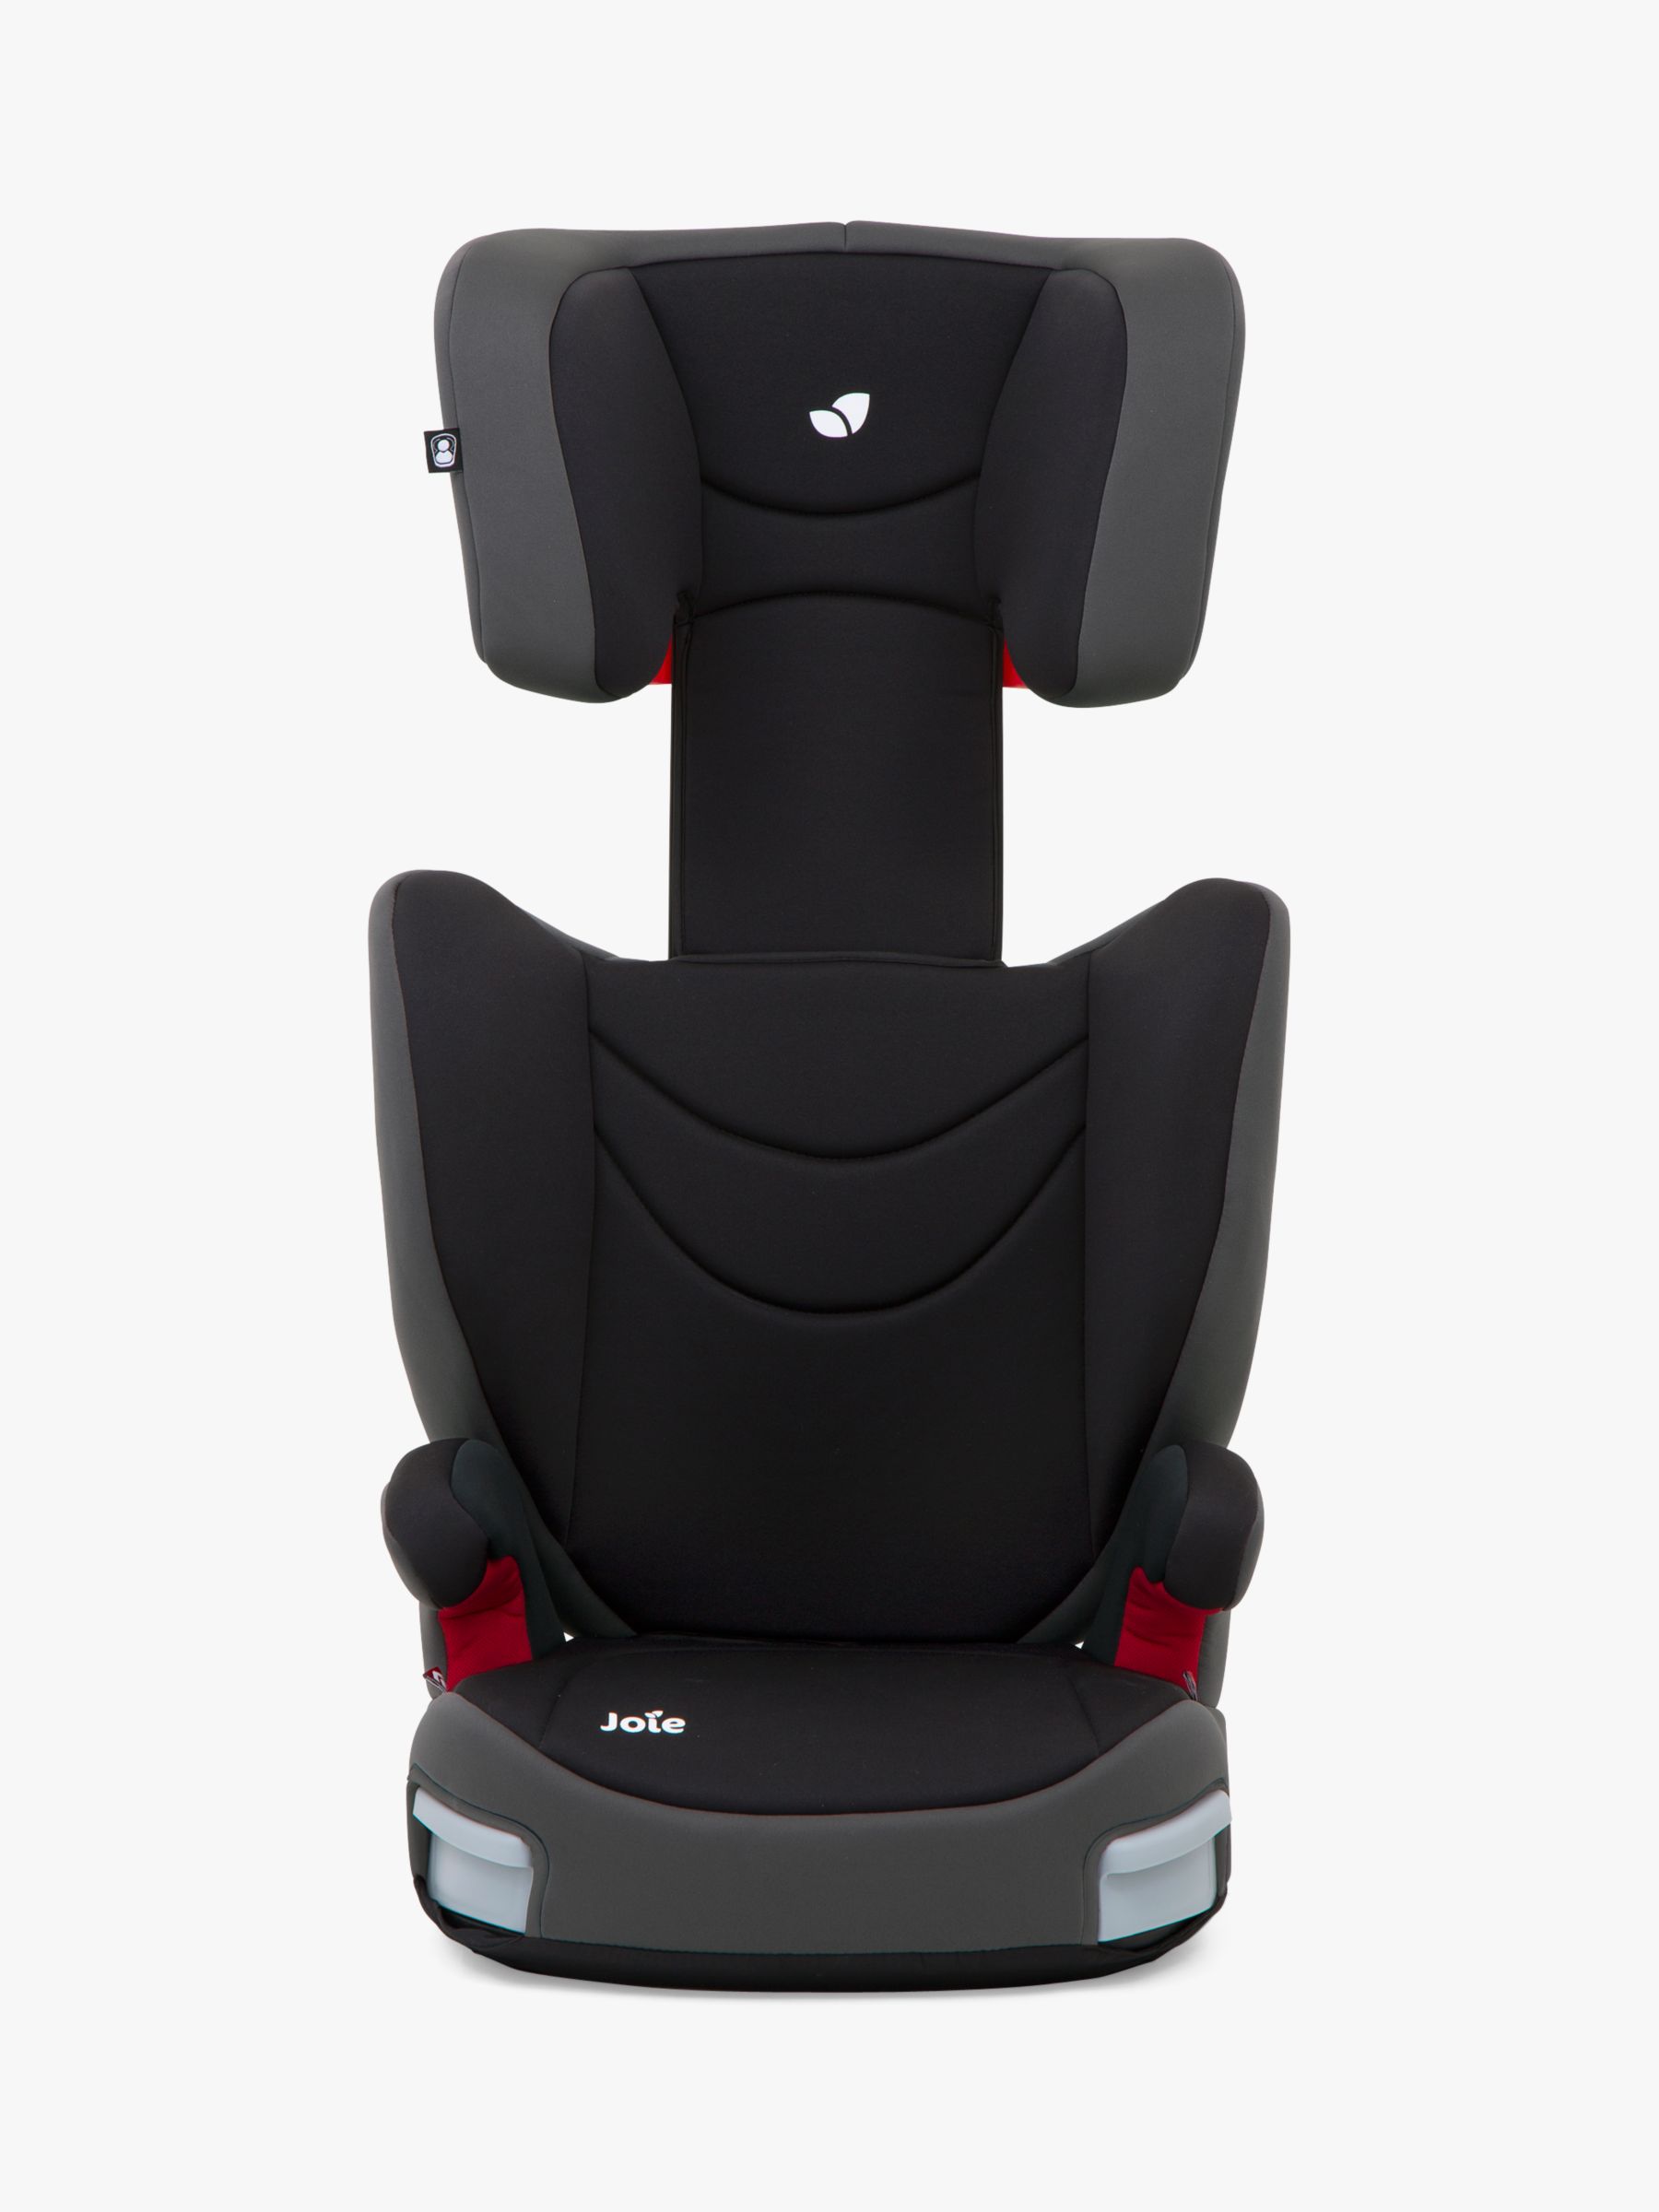 isofix for joie car seat